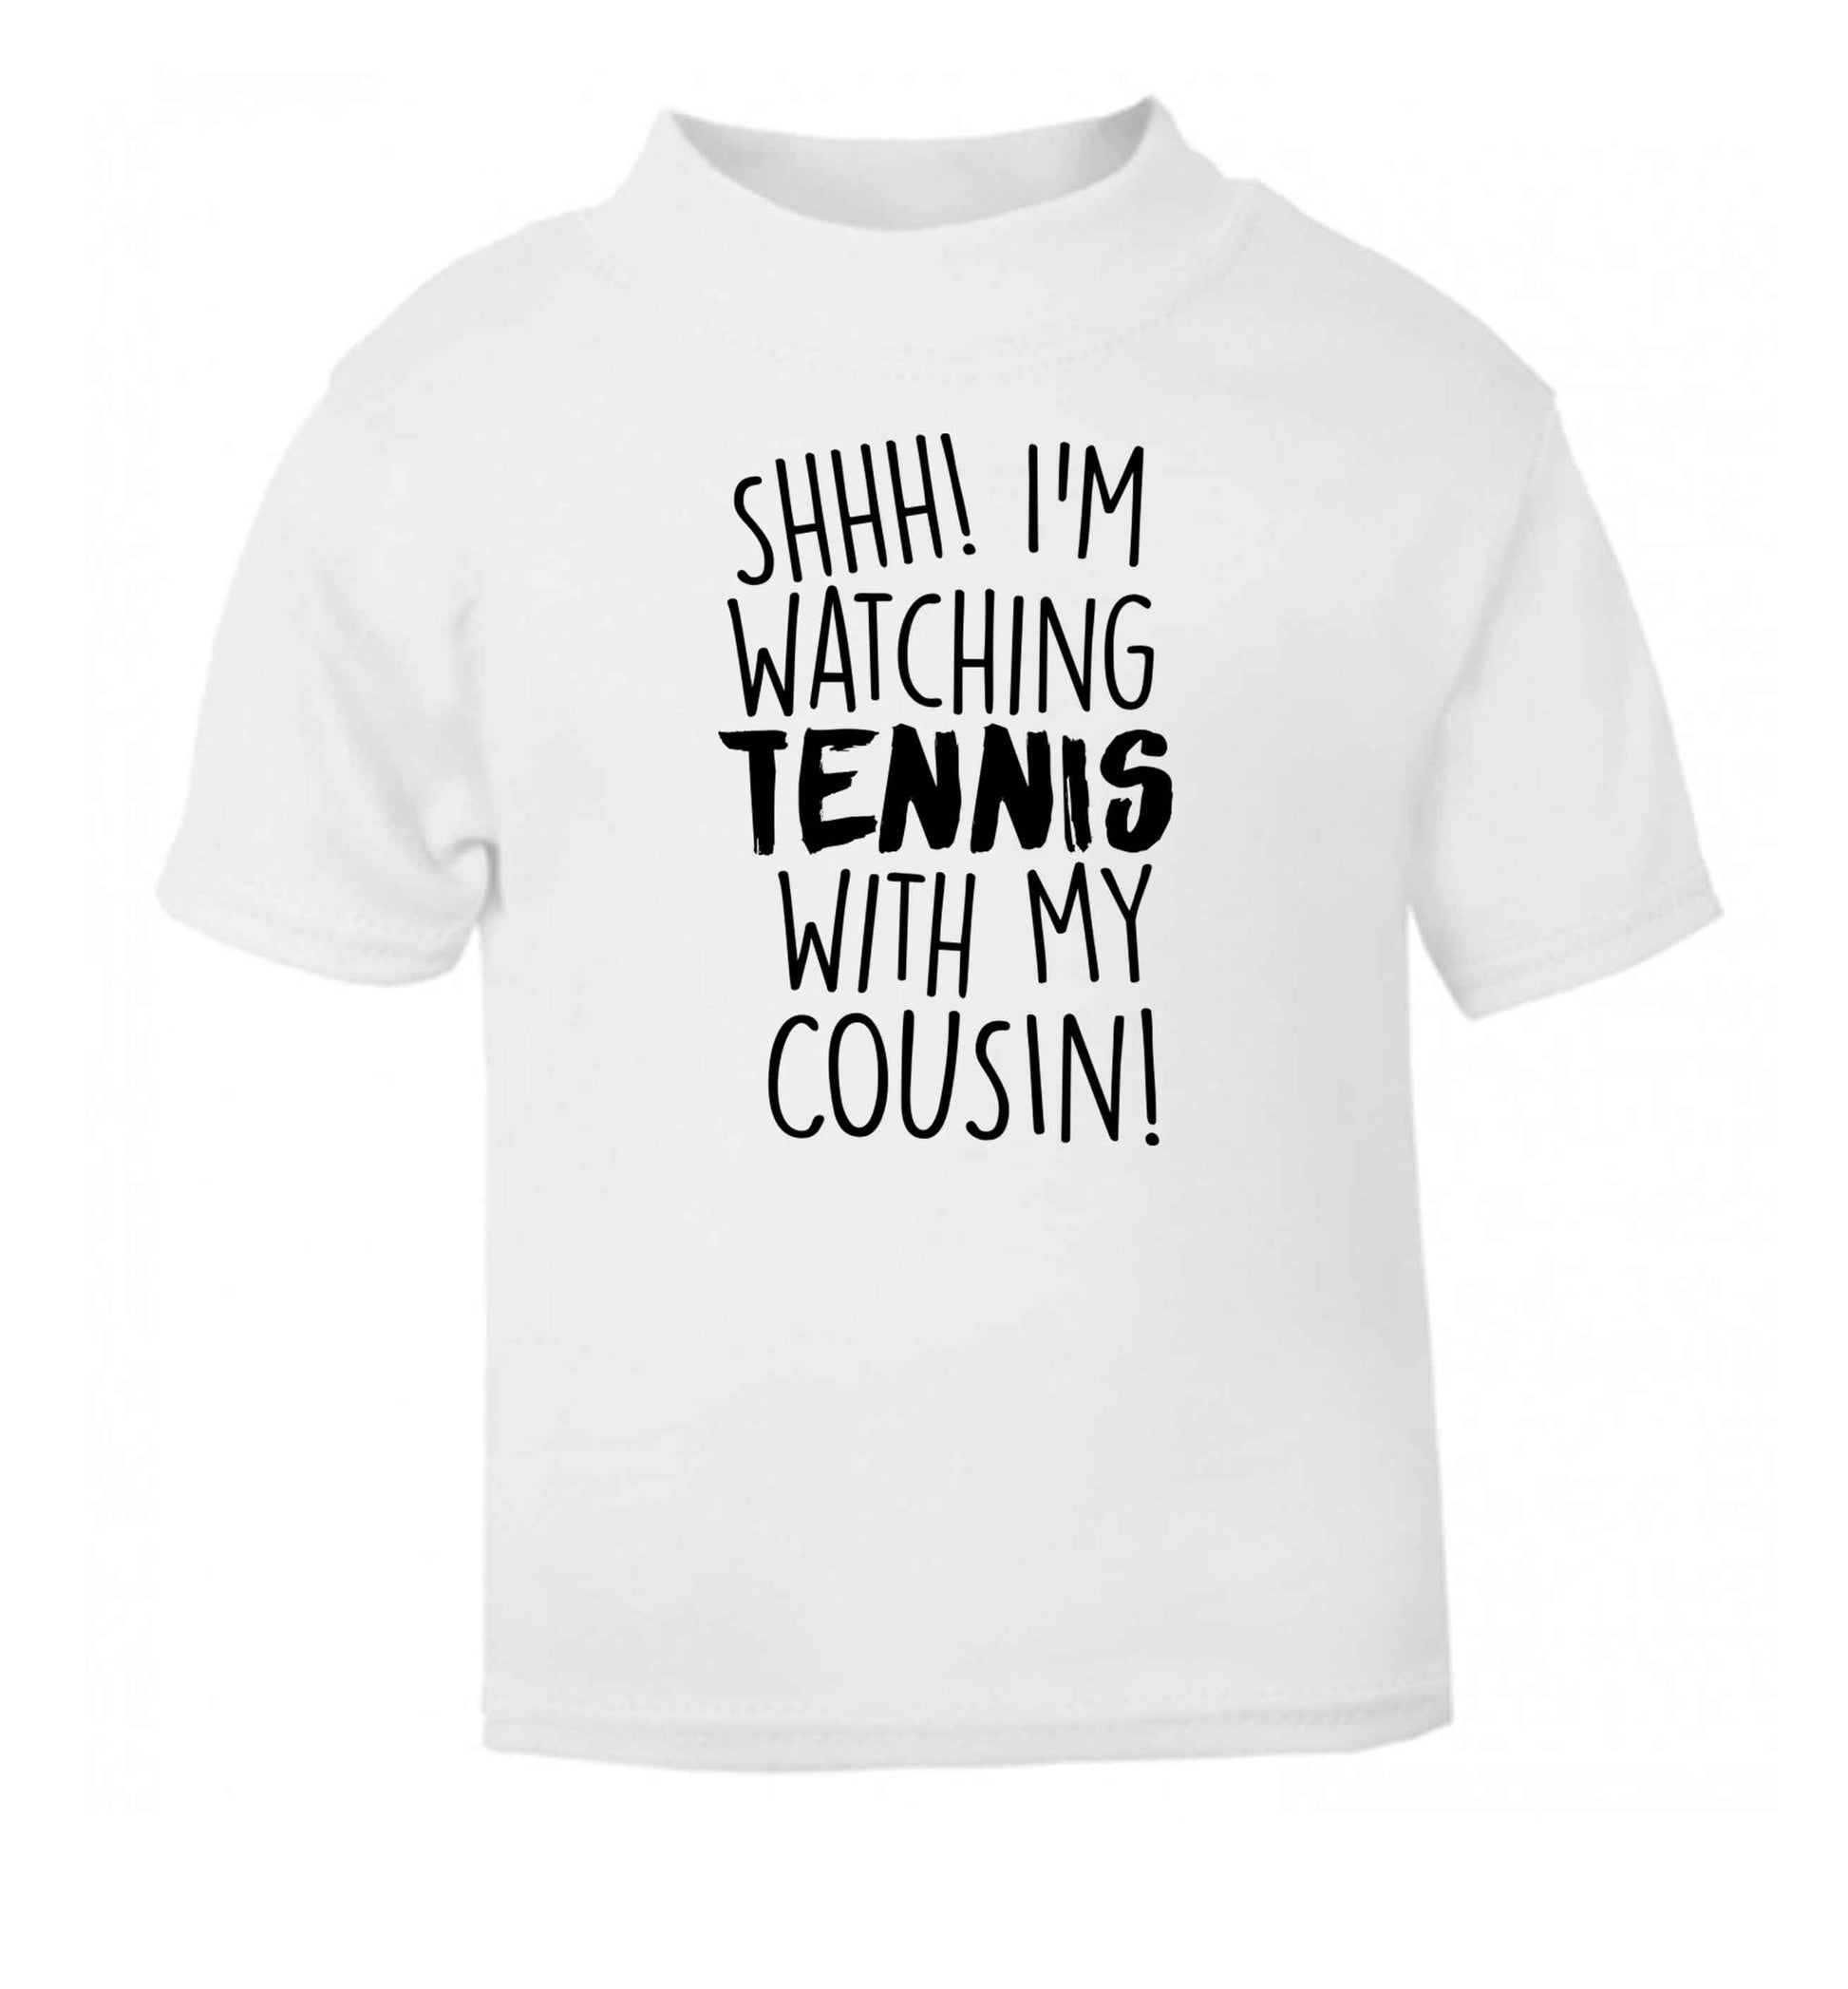 Shh! I'm watching tennis with my cousin! white Baby Toddler Tshirt 2 Years